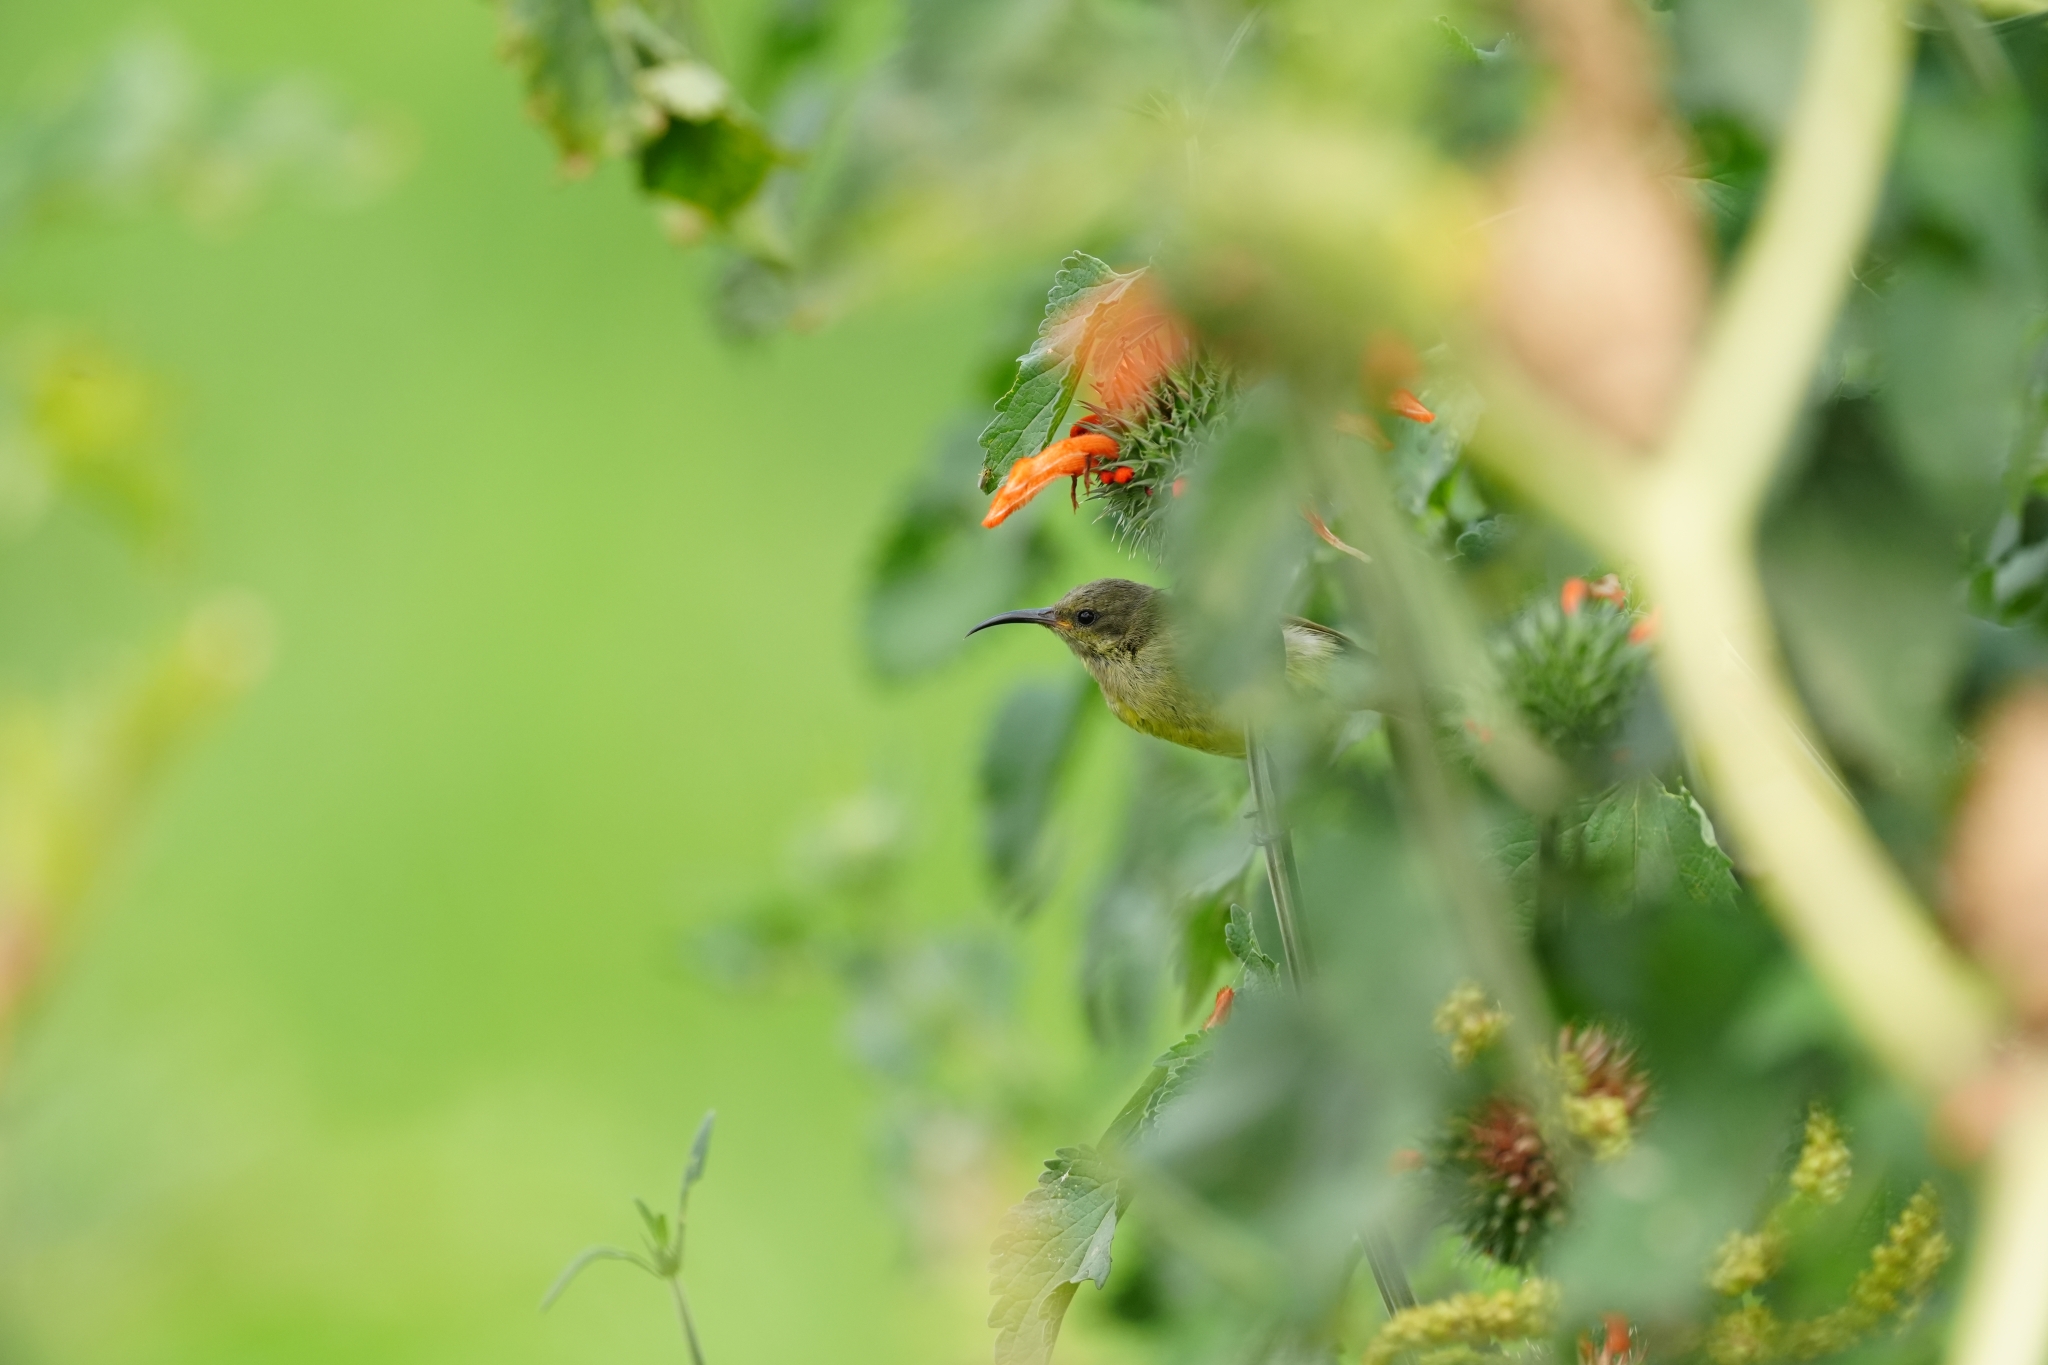 Small green bird and orange flower with plants in bokeh foreground and background